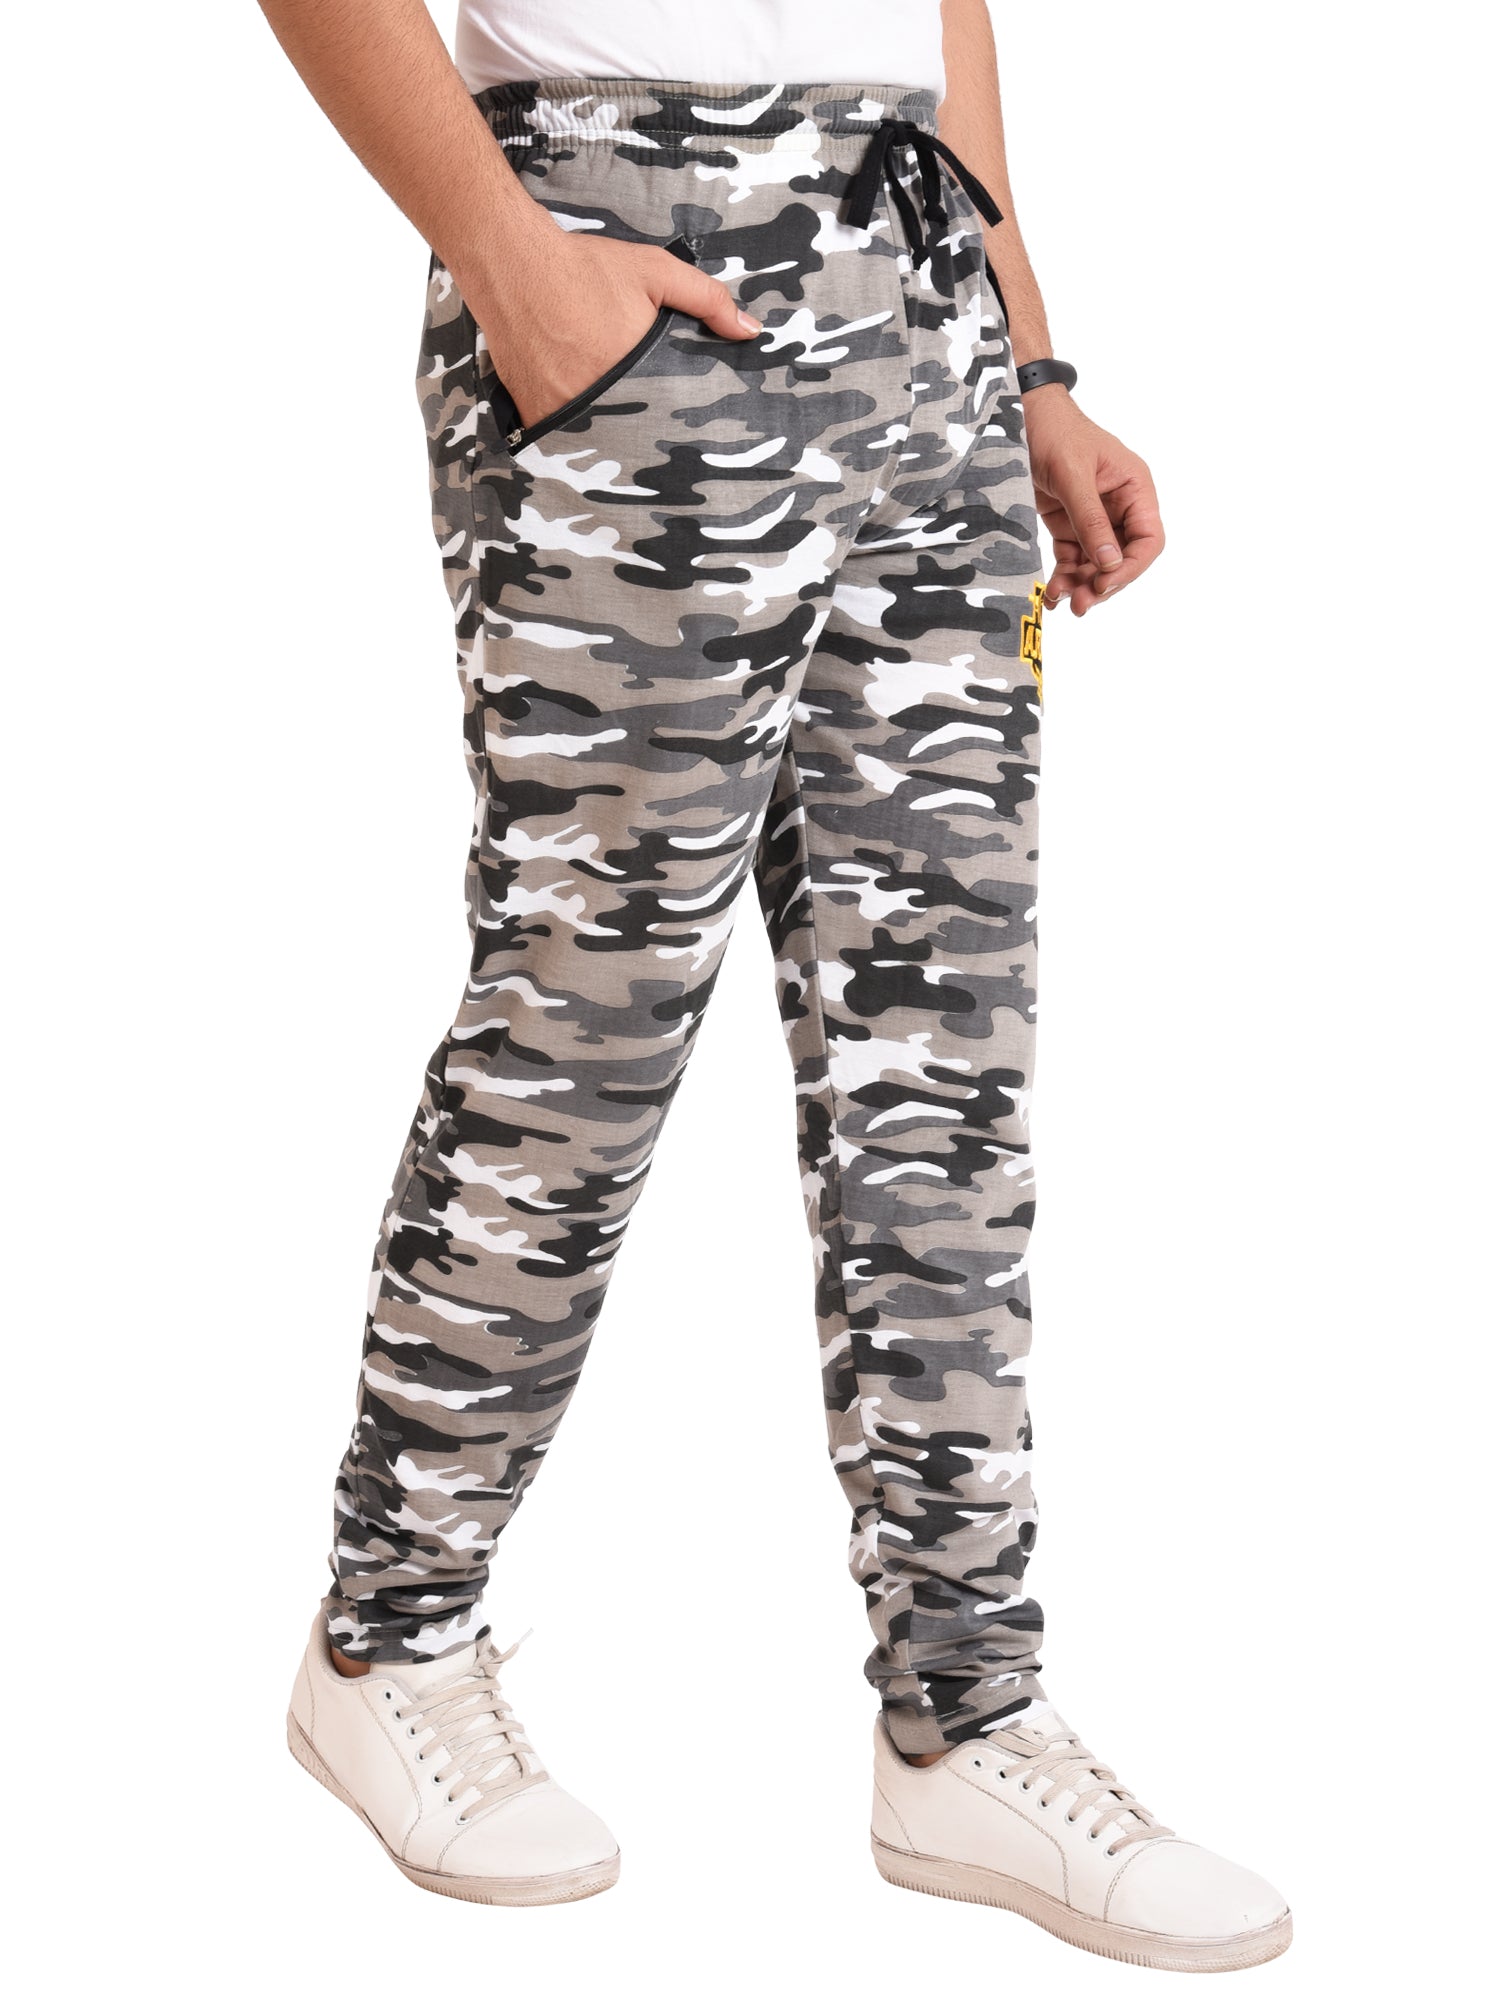 Camouflage Pants Military Clothing Fatigues BDUs Camo Cargo Pants